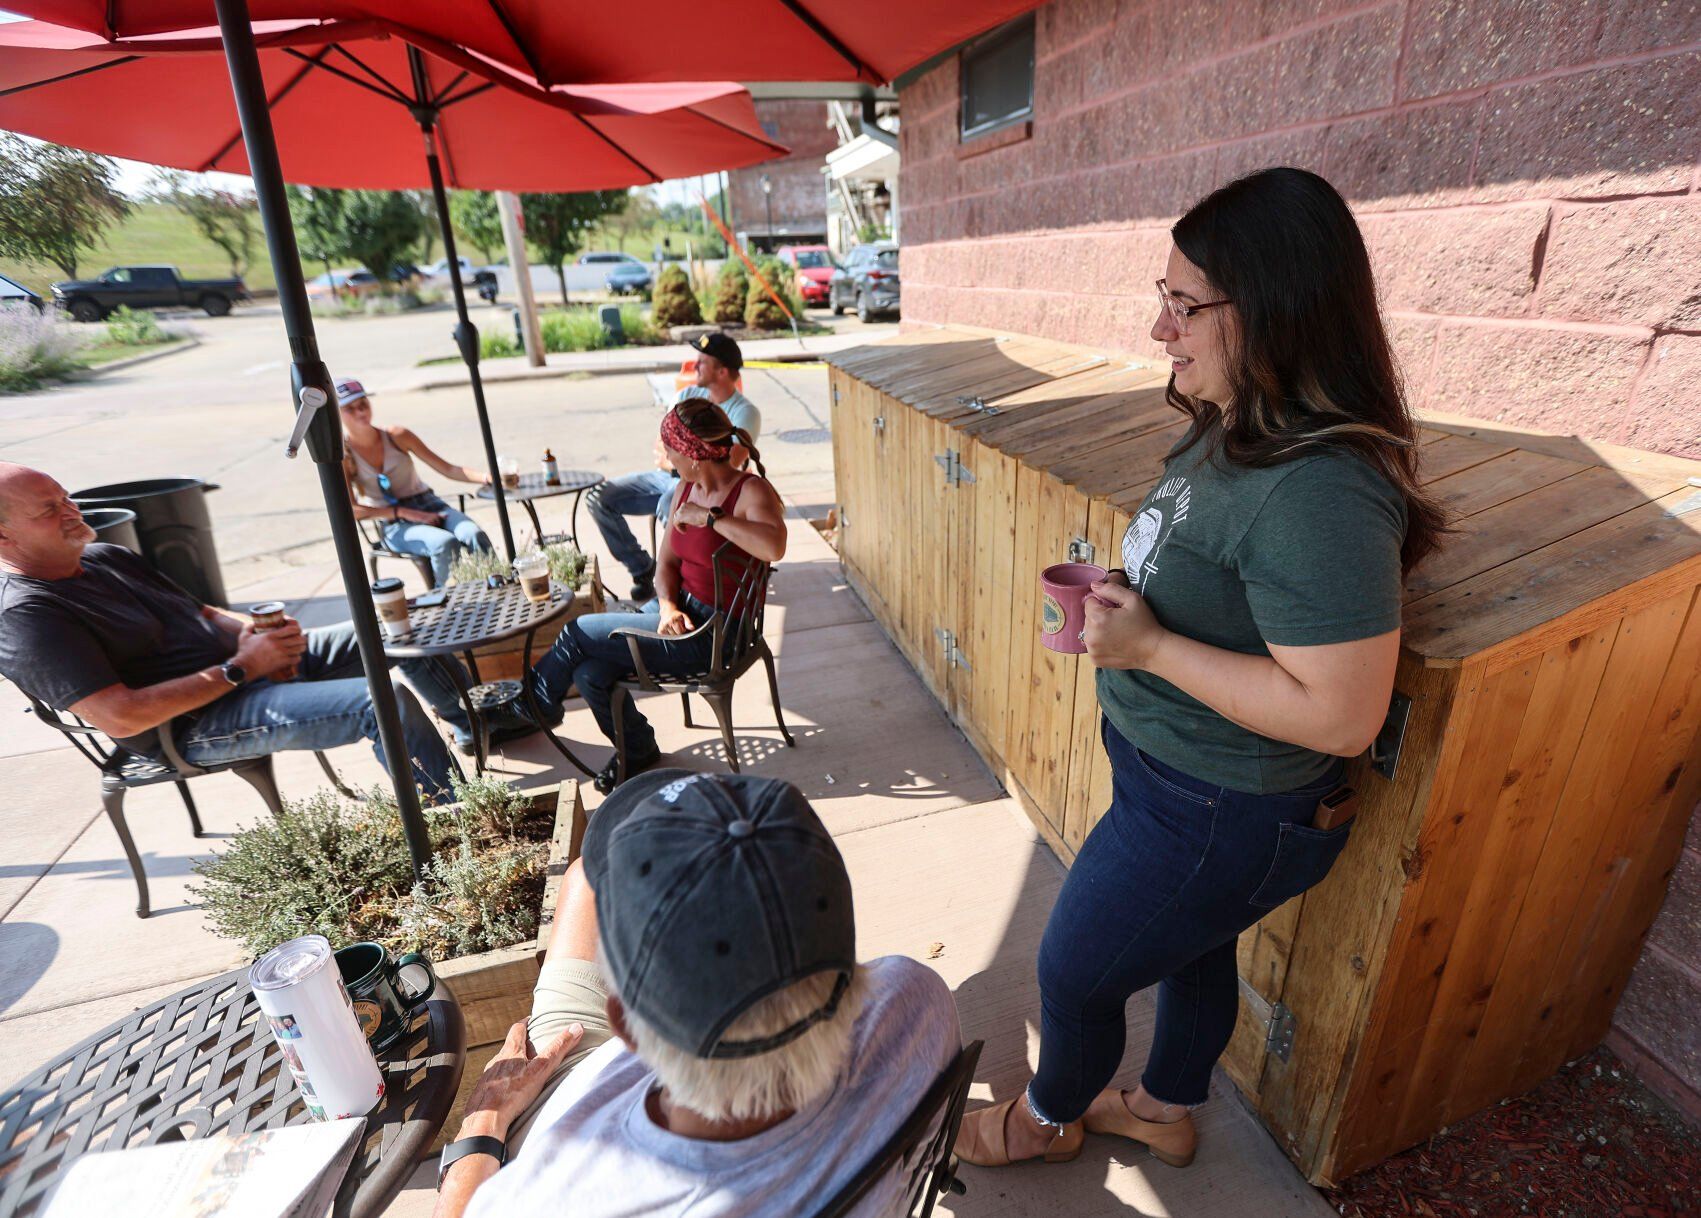 Joy Heller, co-owner of Trolley Depot Coffee & Tea Co. in Galena, Ill., chats with customers on Tuesday.    PHOTO CREDIT: Dave Kettering